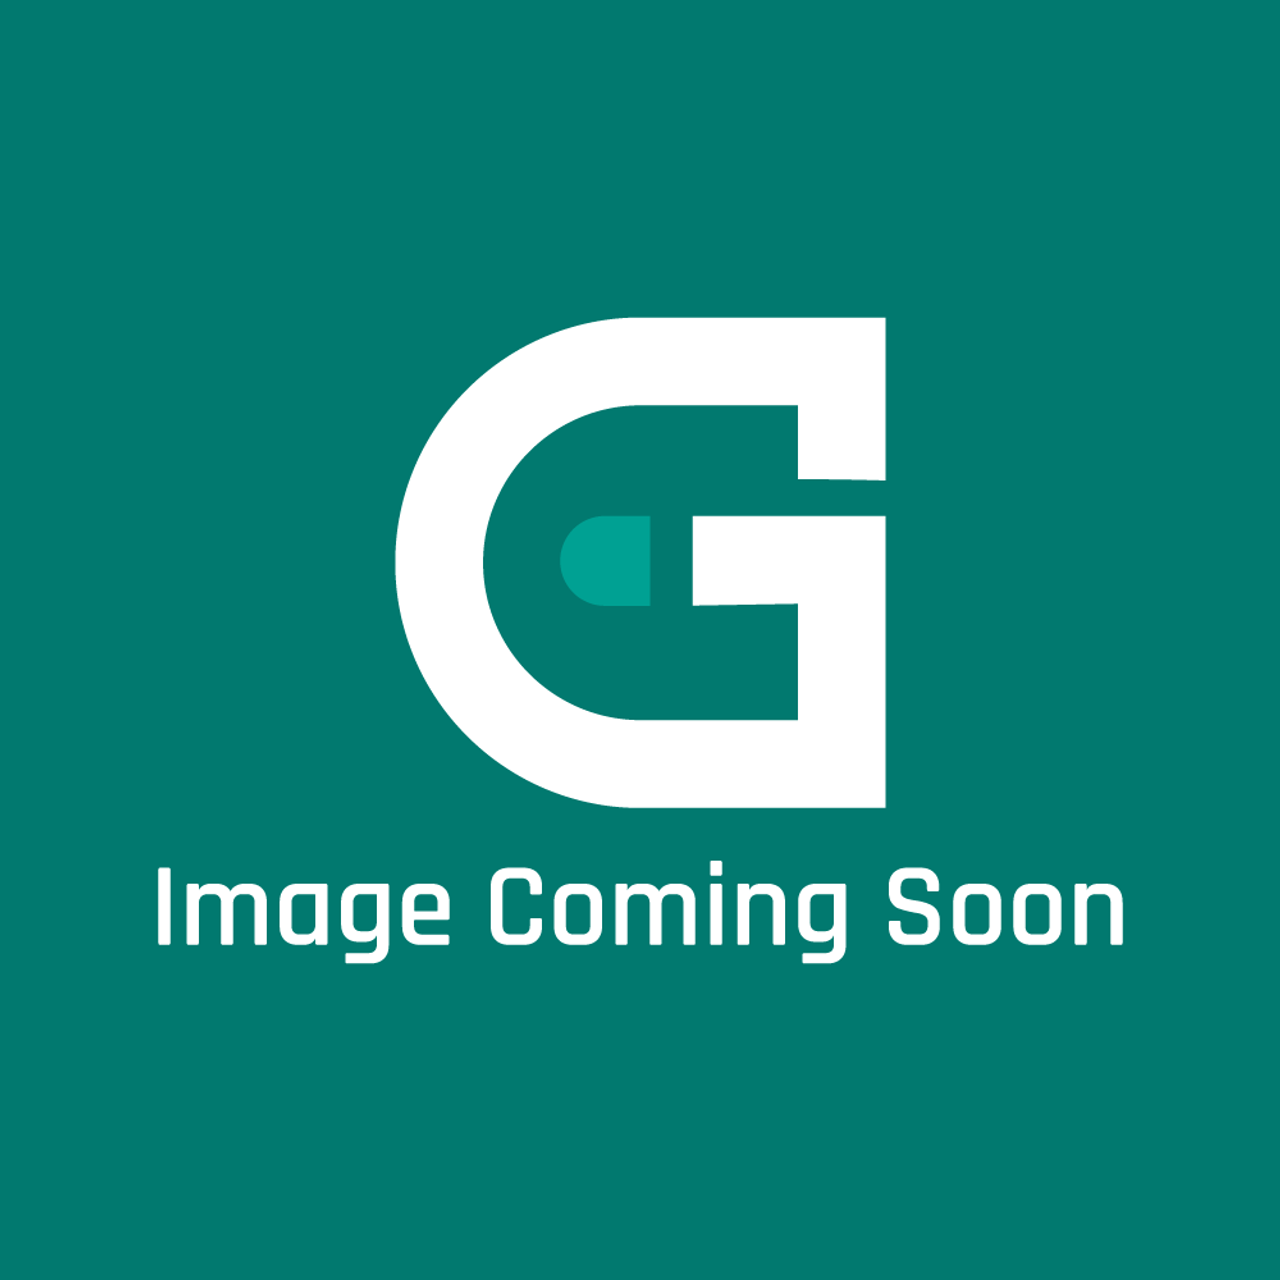 AGA Marvel A4572 - Duel Circ Heater 10.51211.003 - Image Coming Soon!